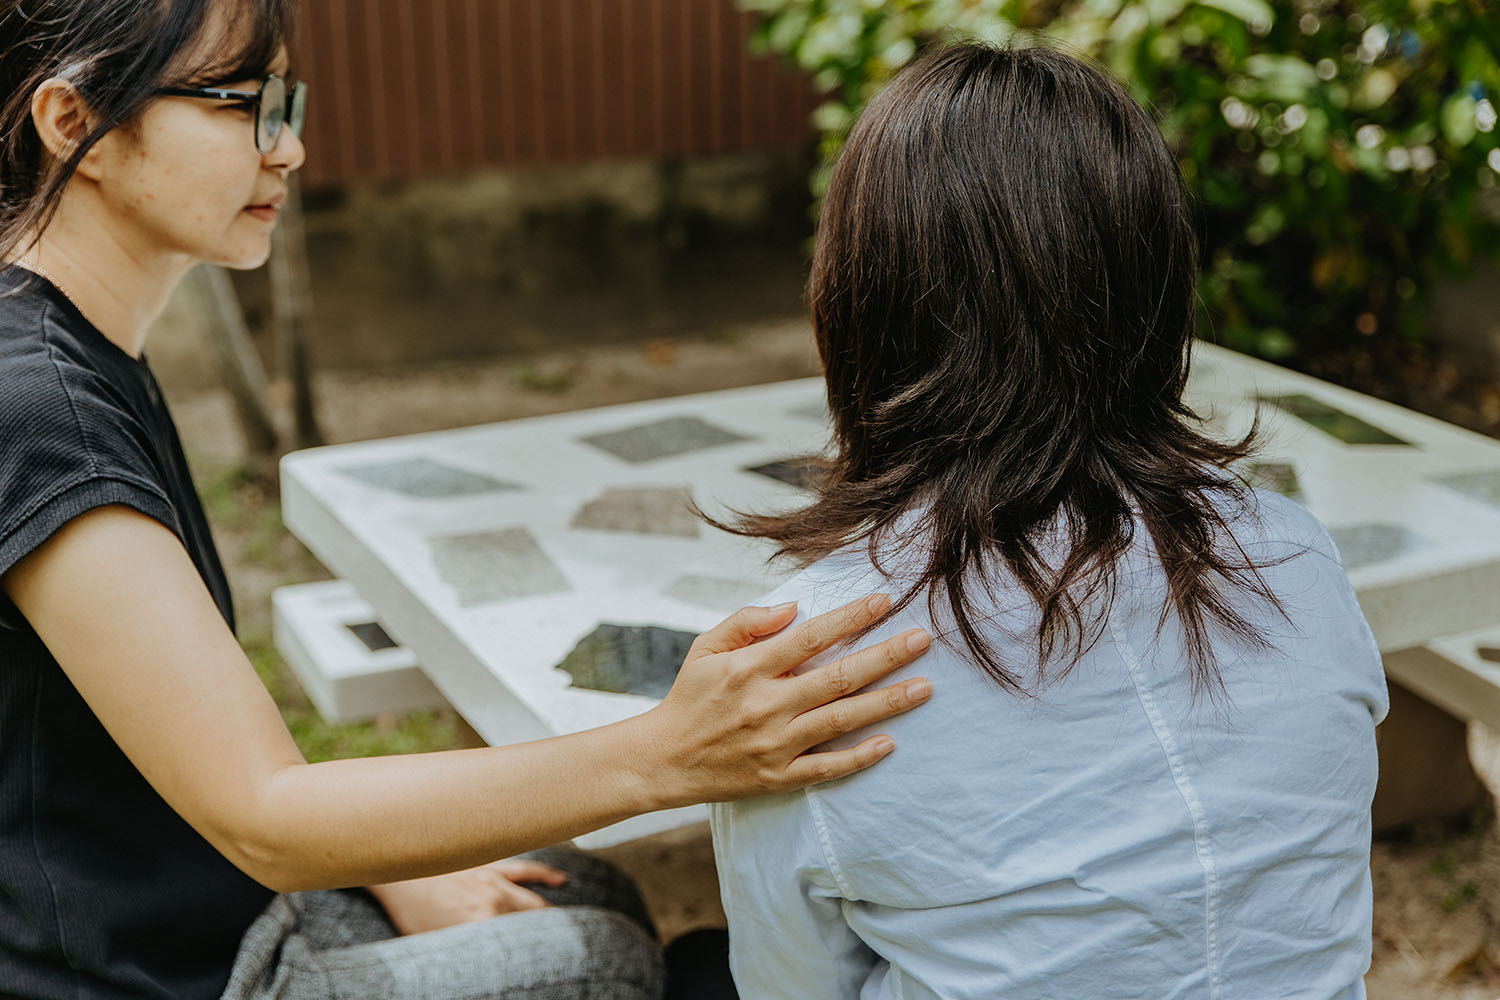 Sex trafficking survivor, Som, sitting with one of The Exodus Road's social workers at Freedom Home in Thailand